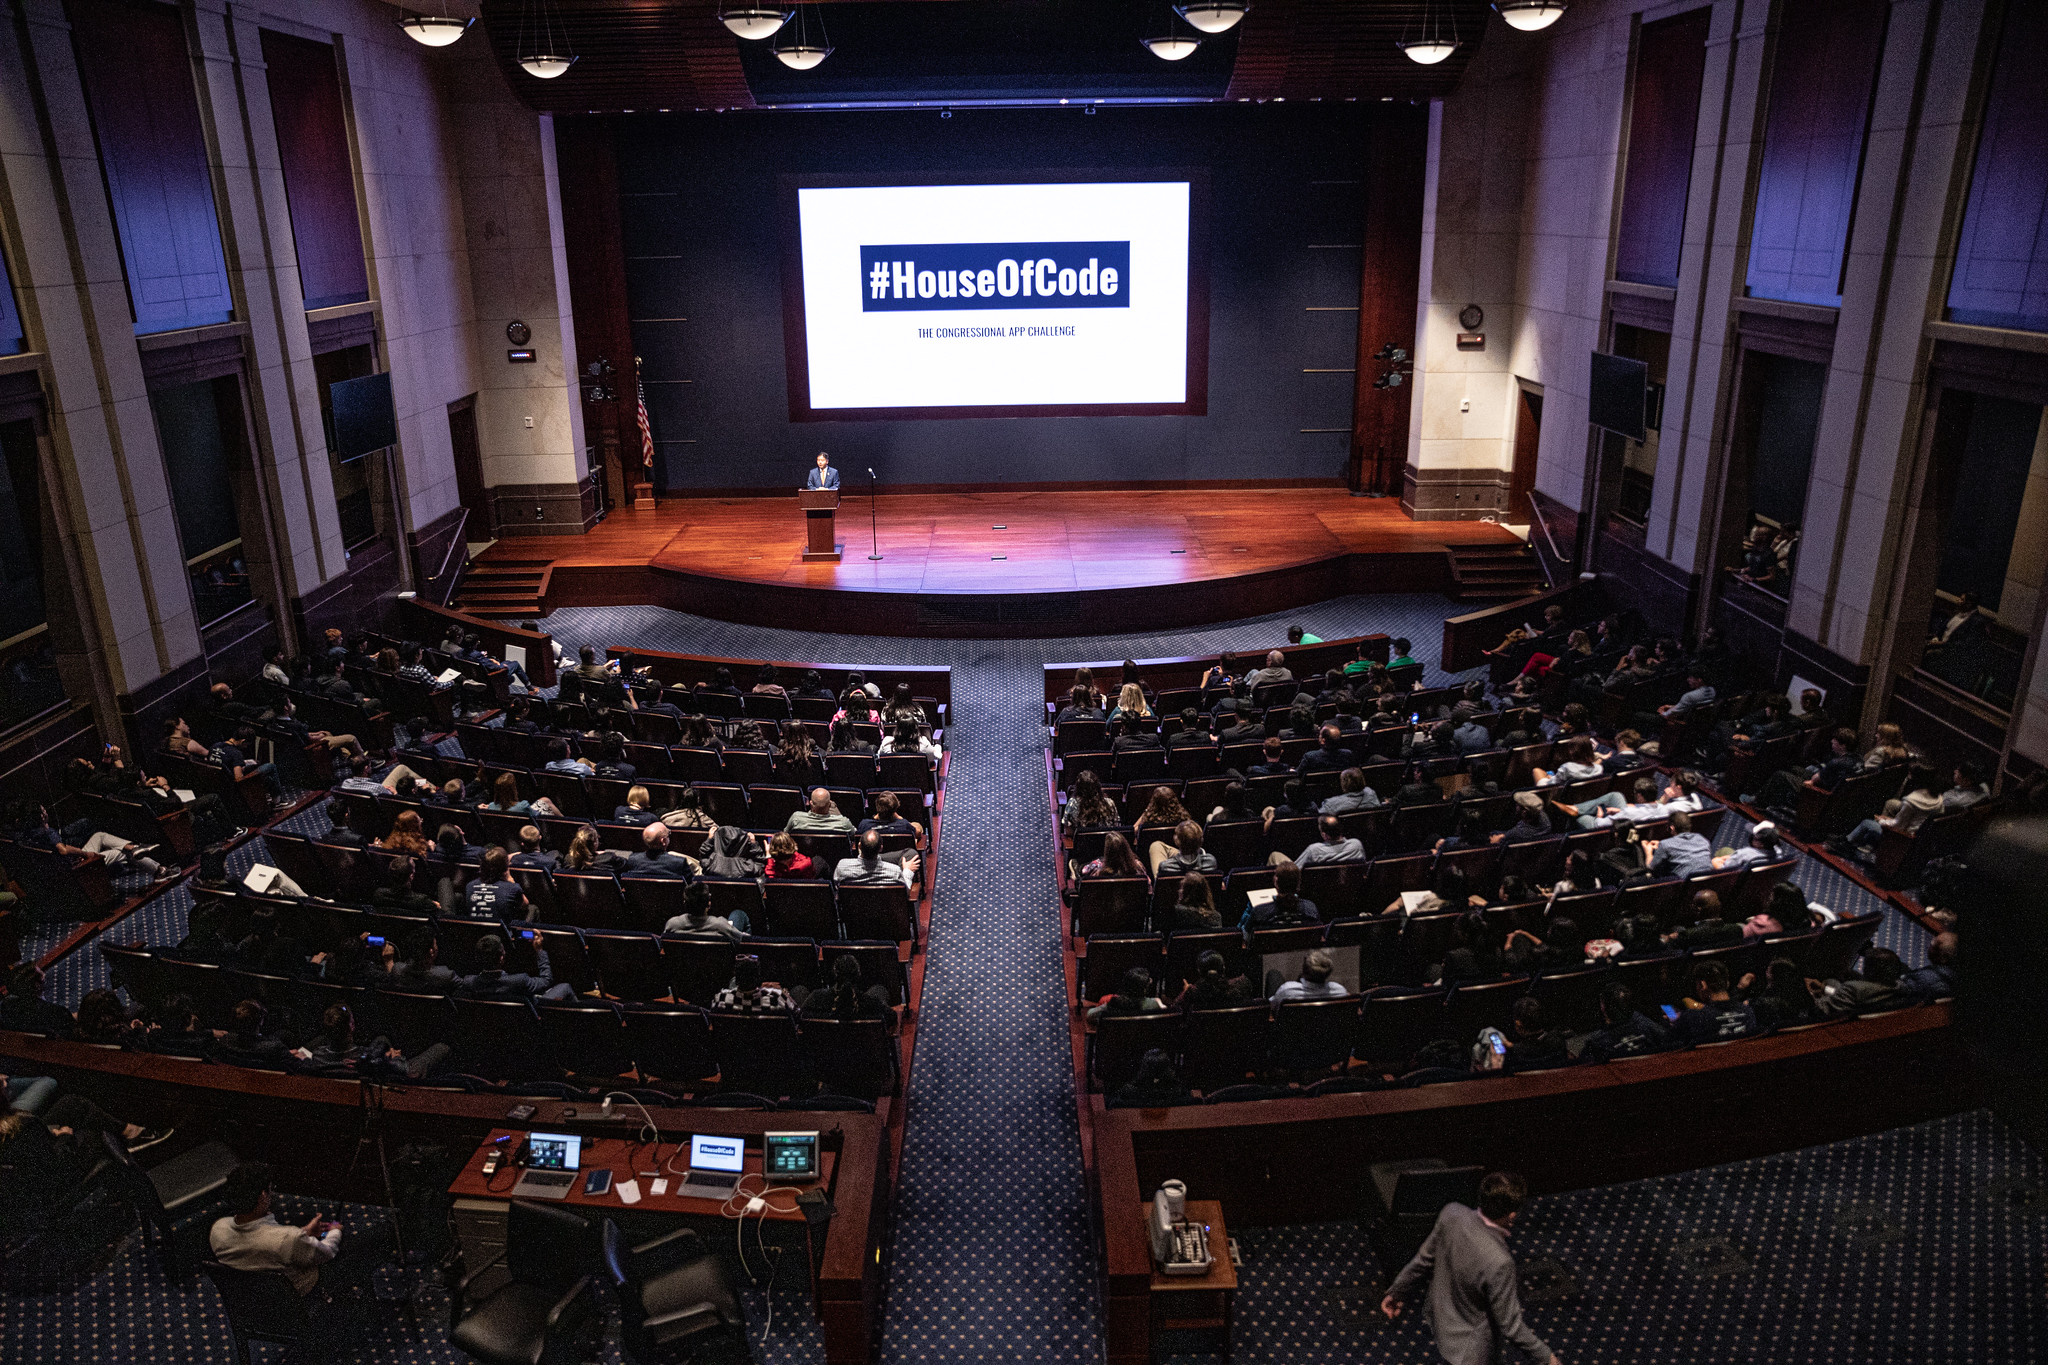 The crowd at #HouseOfCode